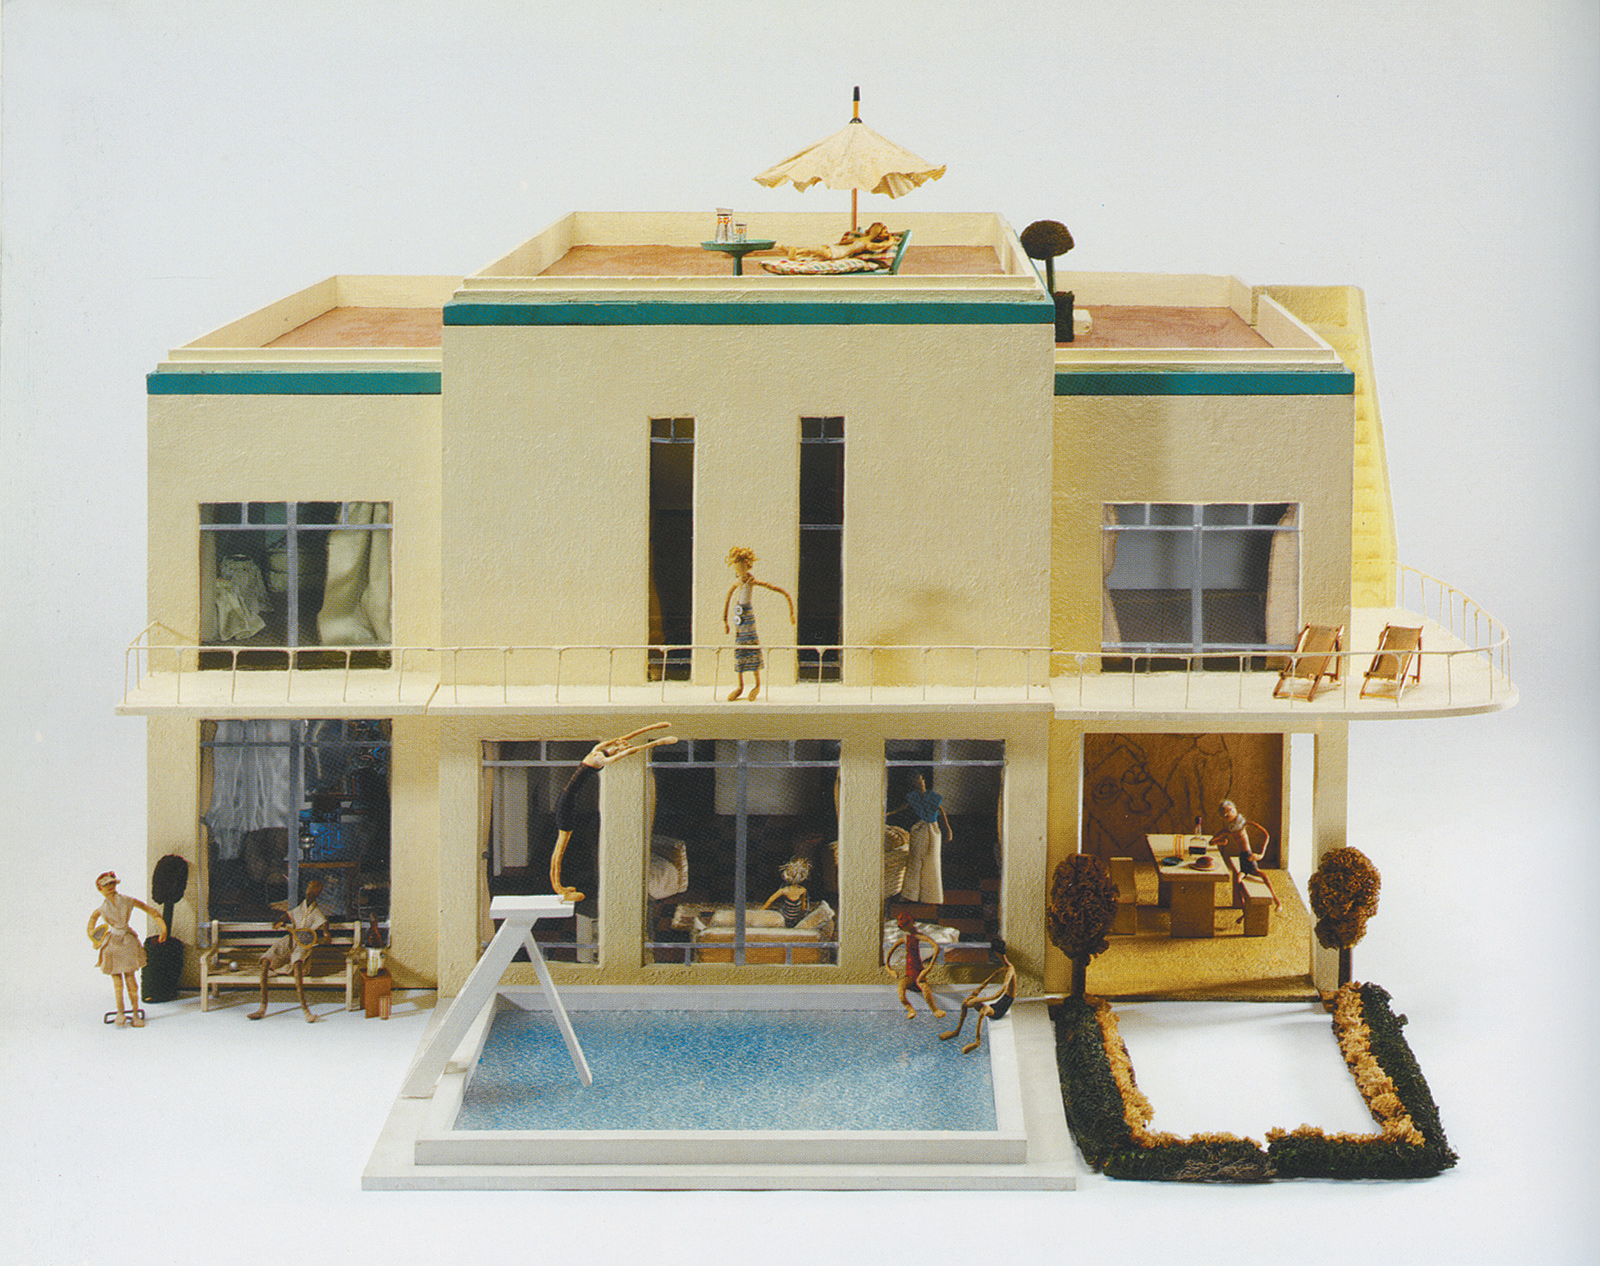 Whiteladies House, designed by Moray Thomas and built by William Purse, 1935; from the ‘Small Stories’ exhibition. ‘With a swimming pool, cocktail bar, and murals by the Futurist painter Claude Flight,’ Patricia Storace writes, this dollhouse ‘evokes Noël Coward’s songs in praise of madcap pranks and improvised parties, and Evelyn Waugh’s Bright Young Things.’